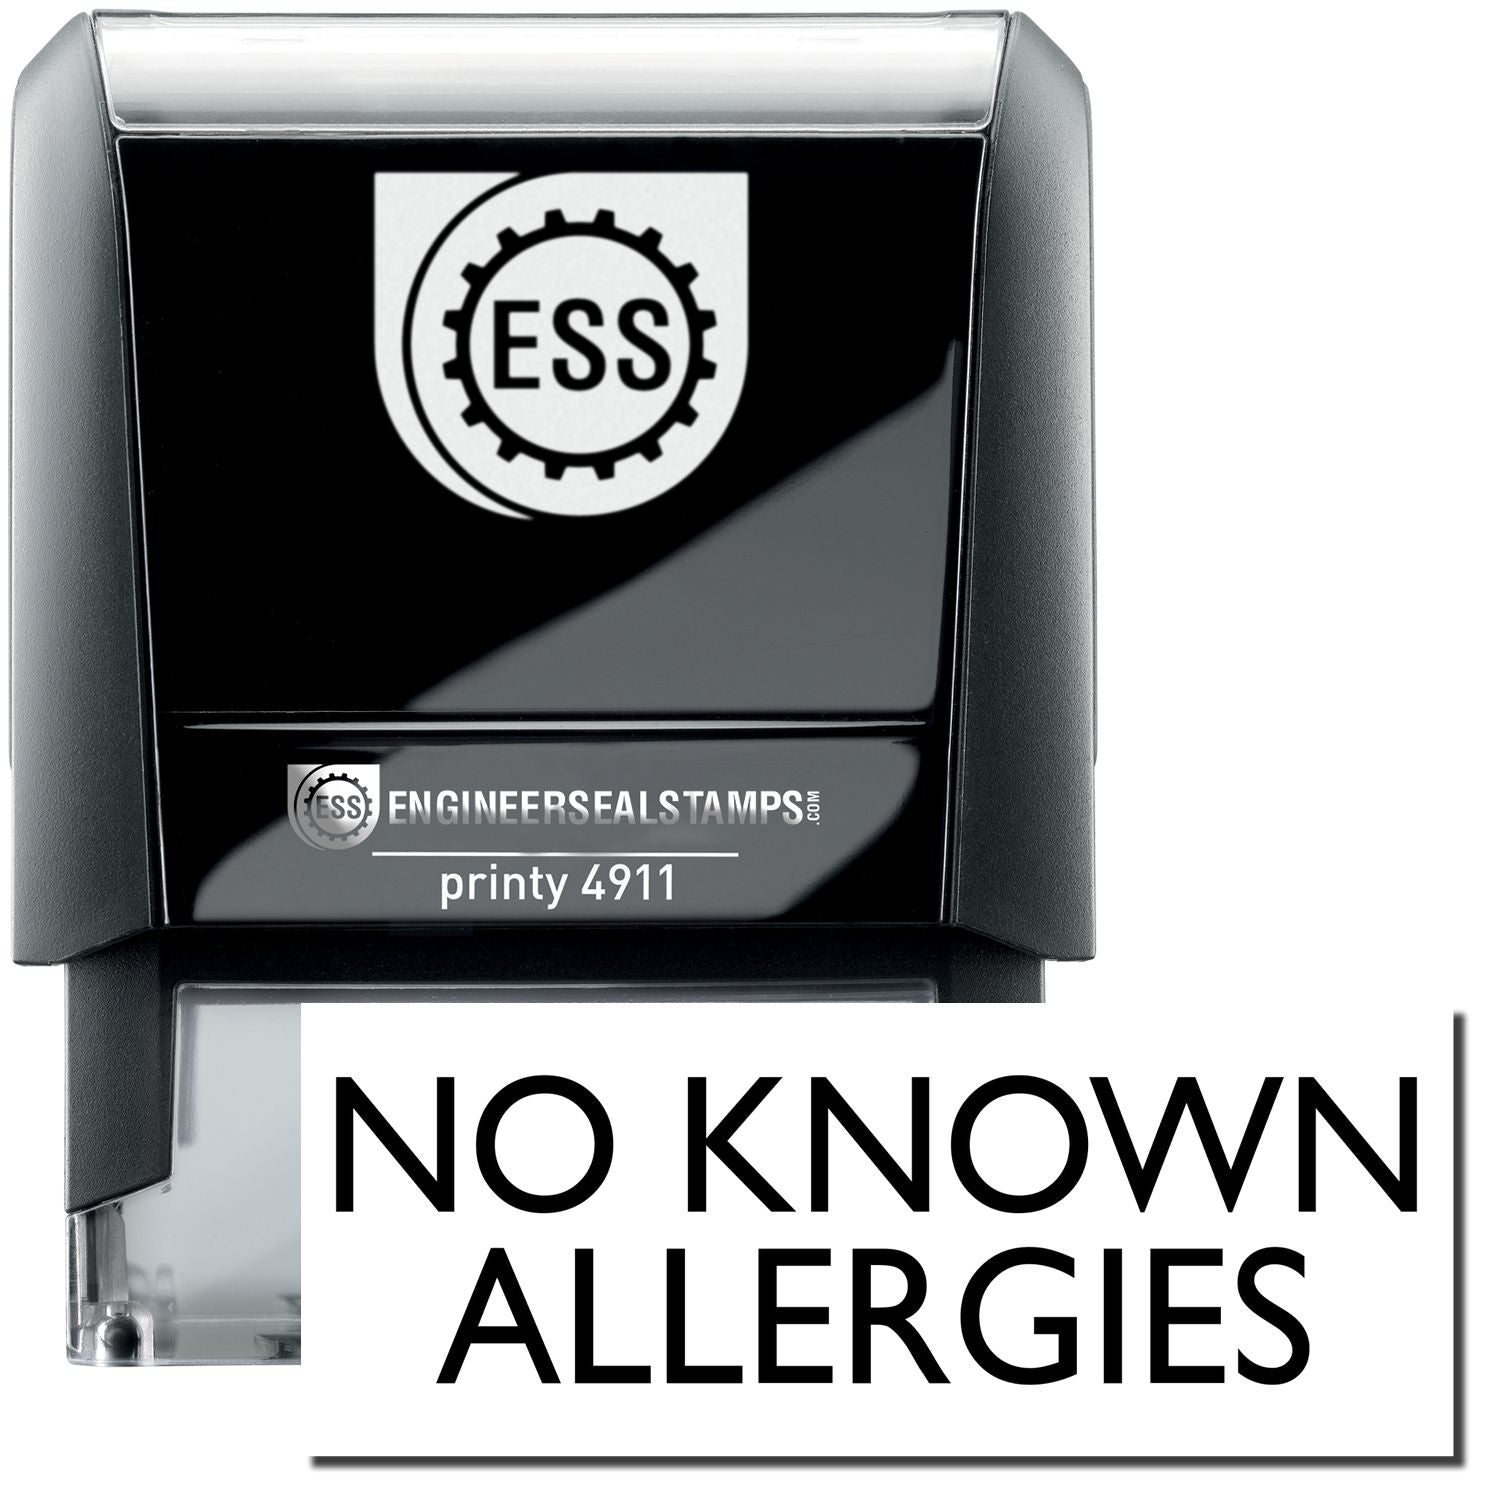 A self-inking stamp with a stamped image showing how the text "NO KNOWN ALLERGIES" is displayed after stamping.